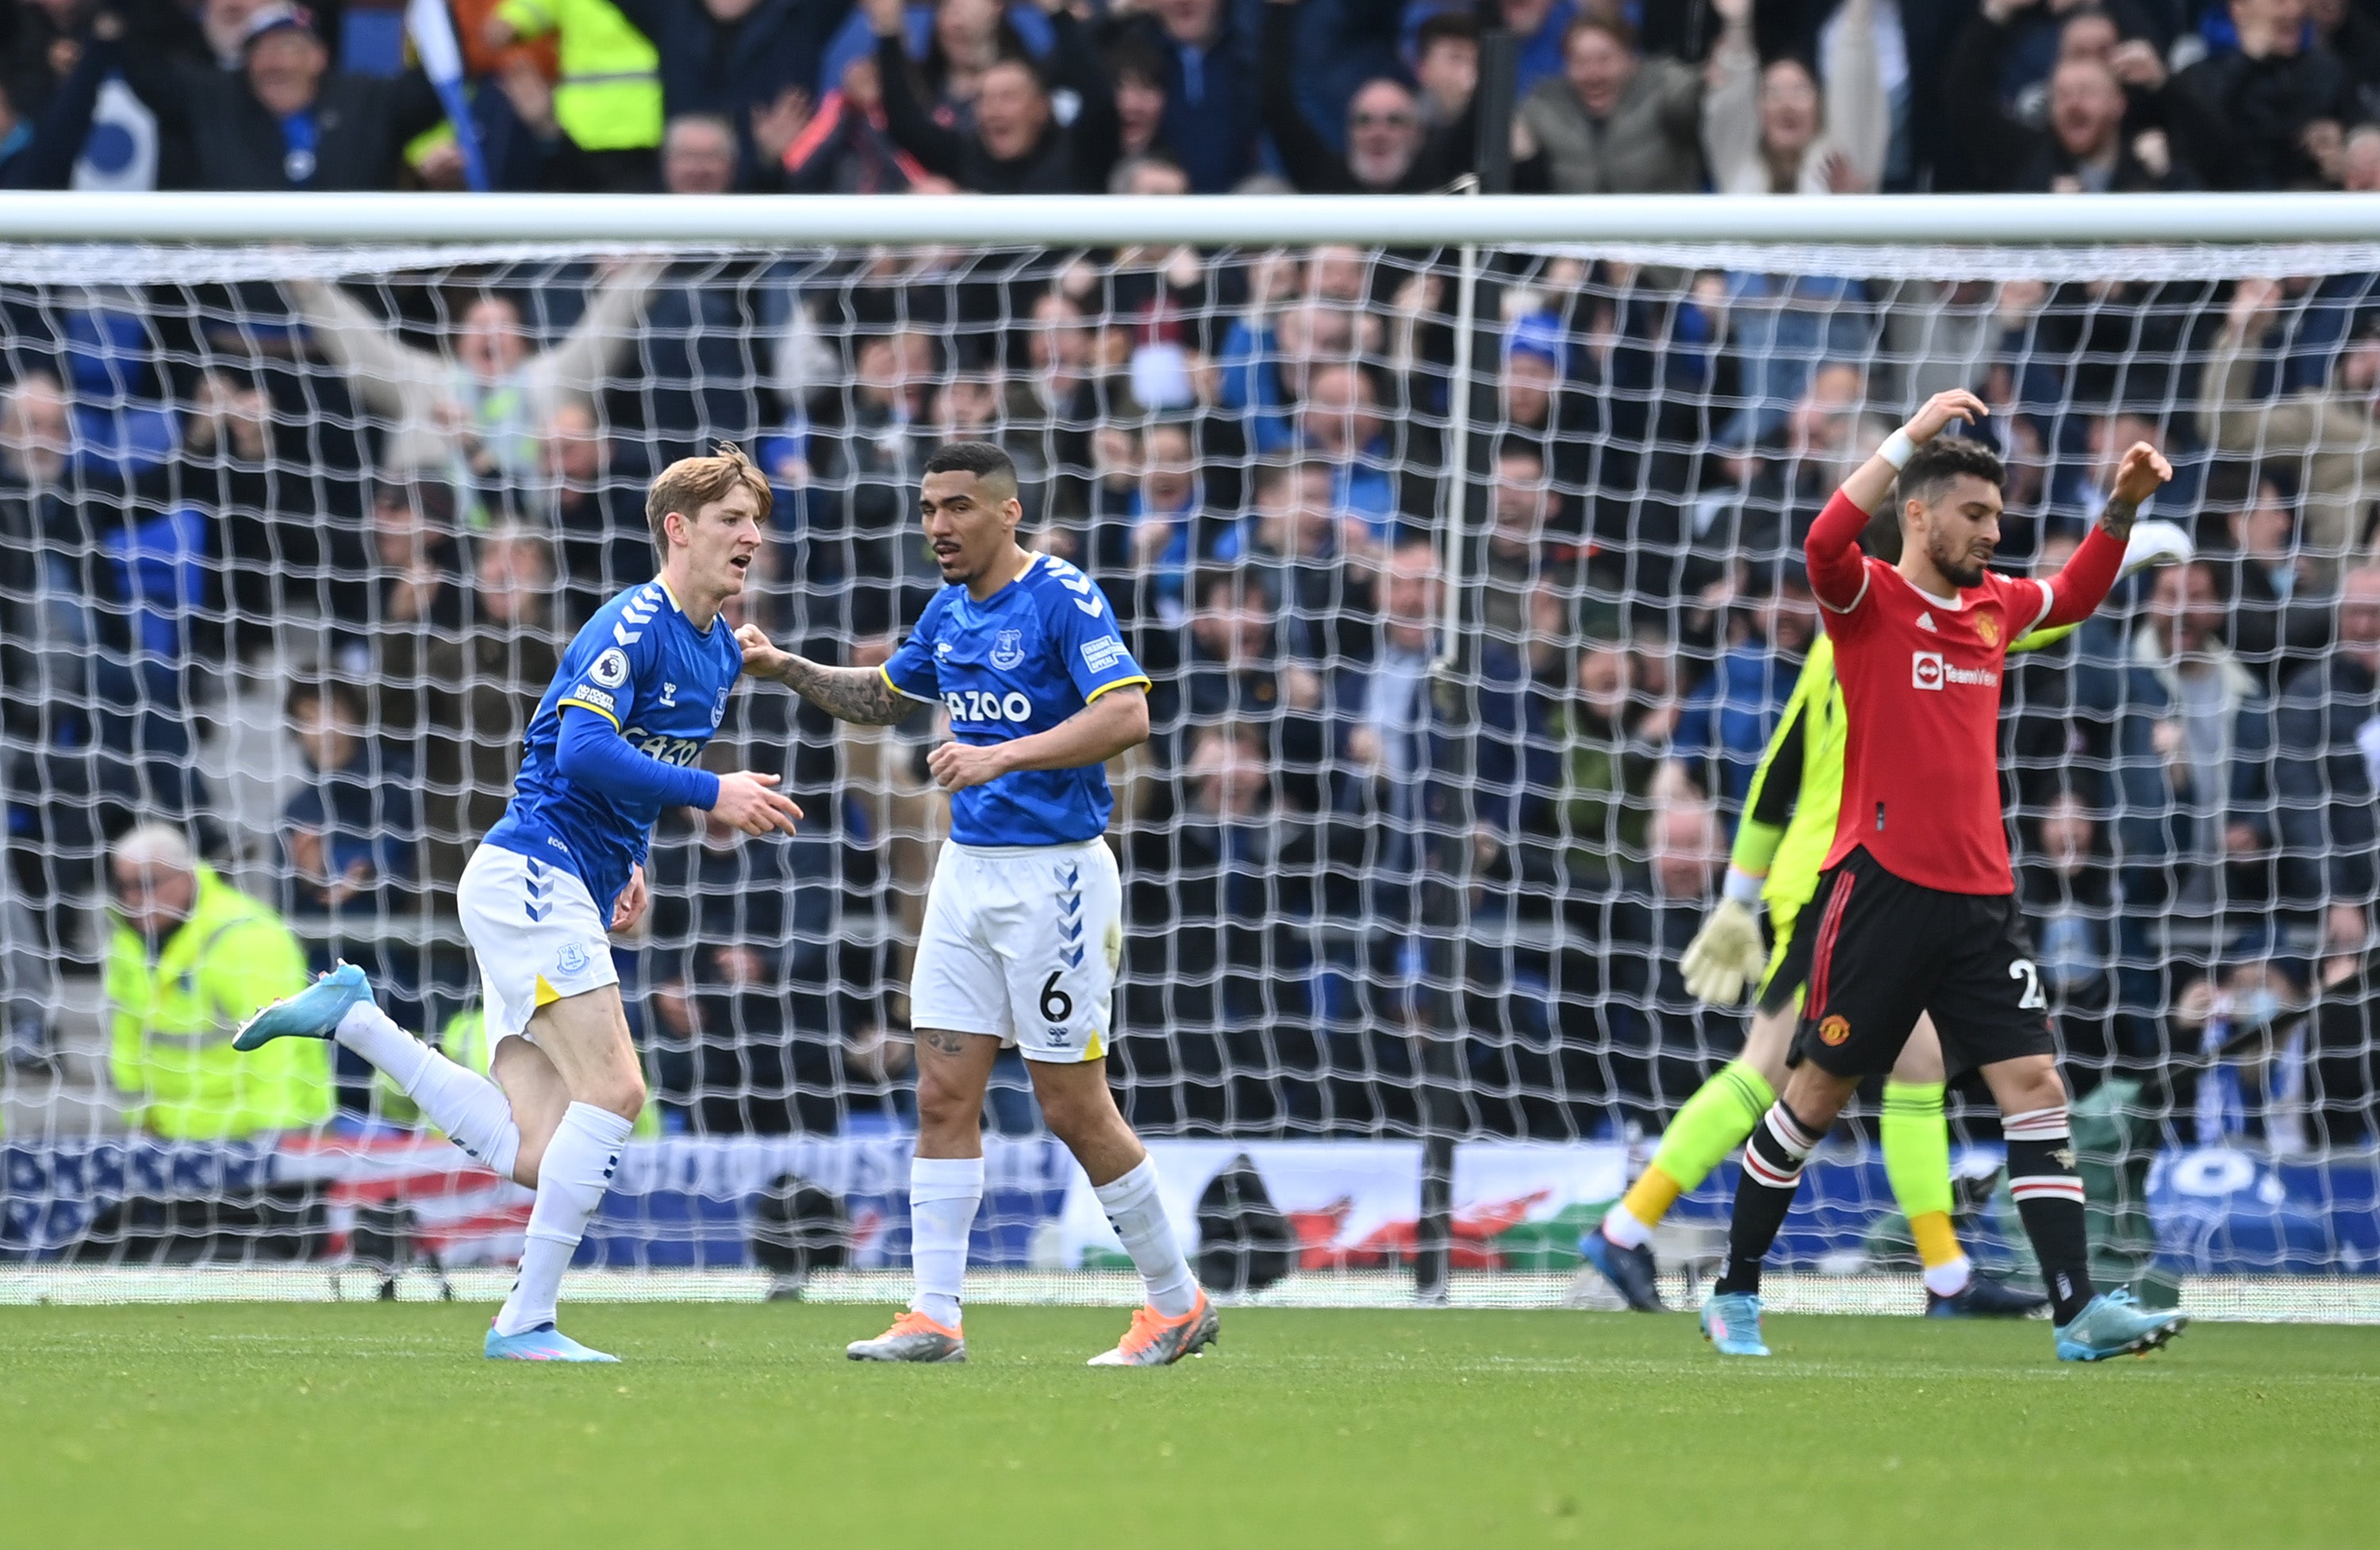 Everton and Manchester United square off at Goodison Park